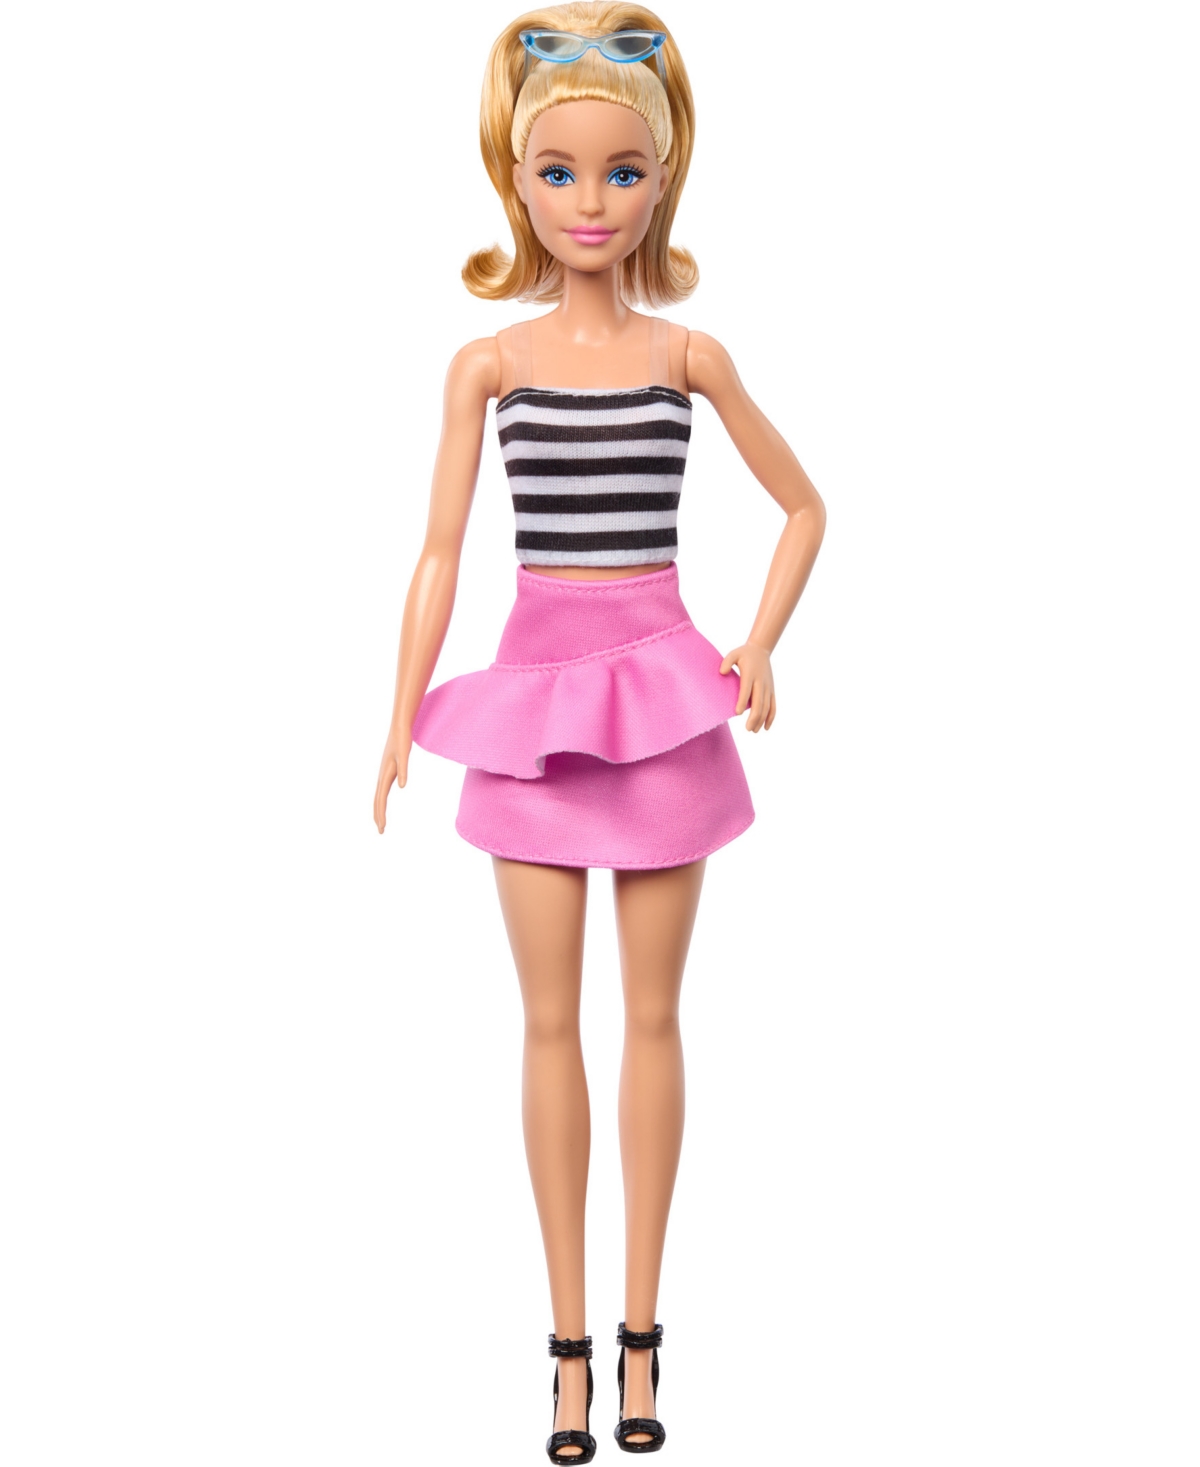 Shop Barbie Fashionistas Doll 213, Blonde With Striped Top, Pink Skirt And Sunglasses, 65th Anniversary In Multi